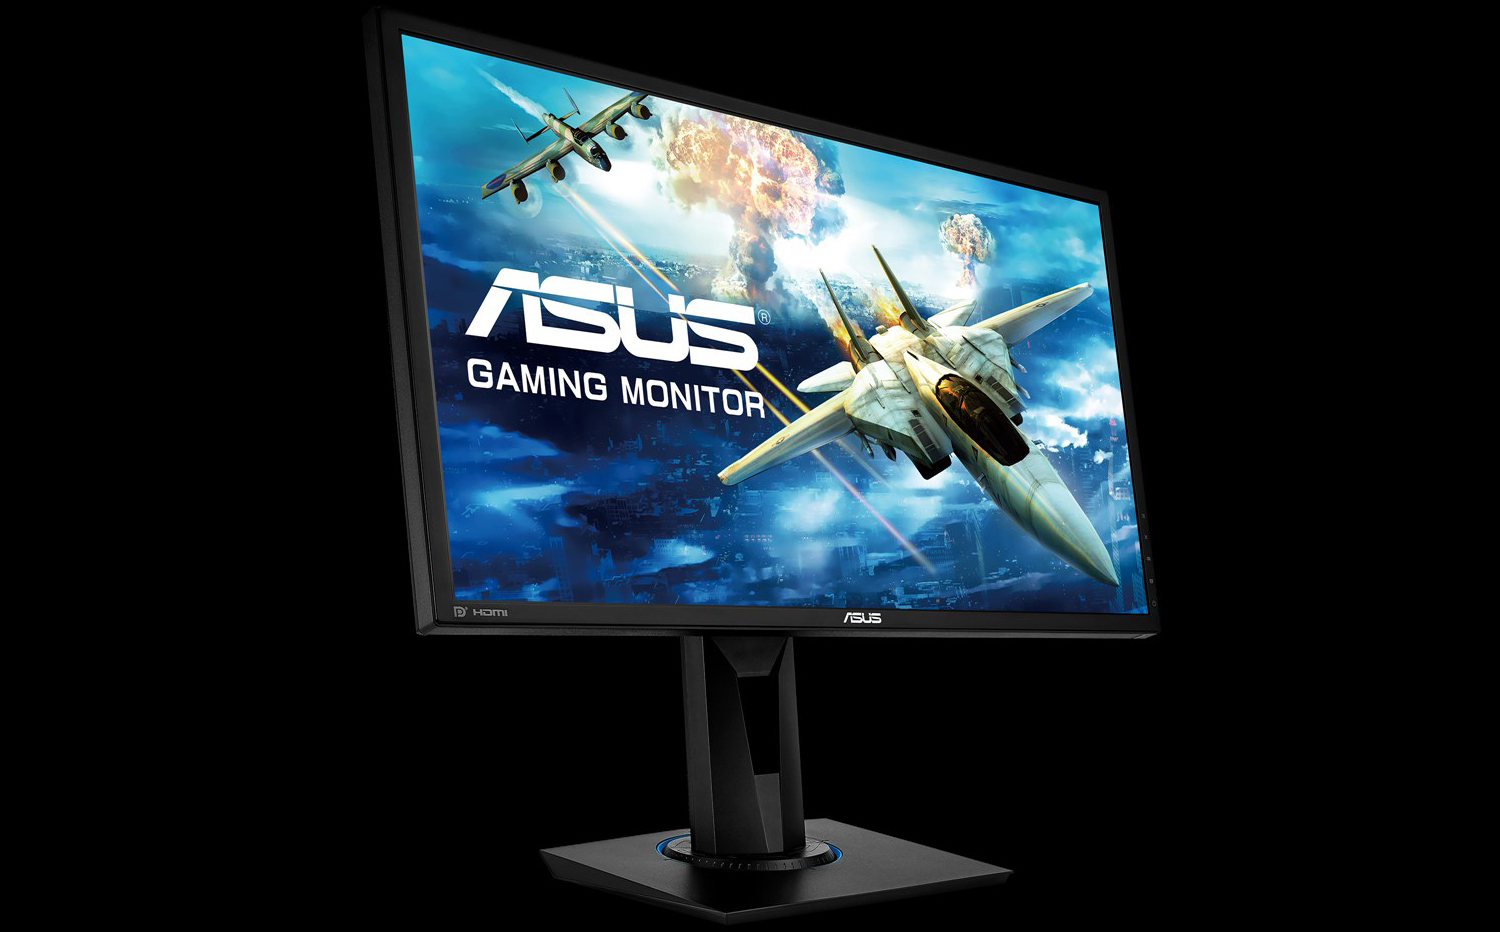 partiskhed Had magi ASUS Launches VG245Q 'Console' Gaming Monitor: 1080p with FreeSync, $200